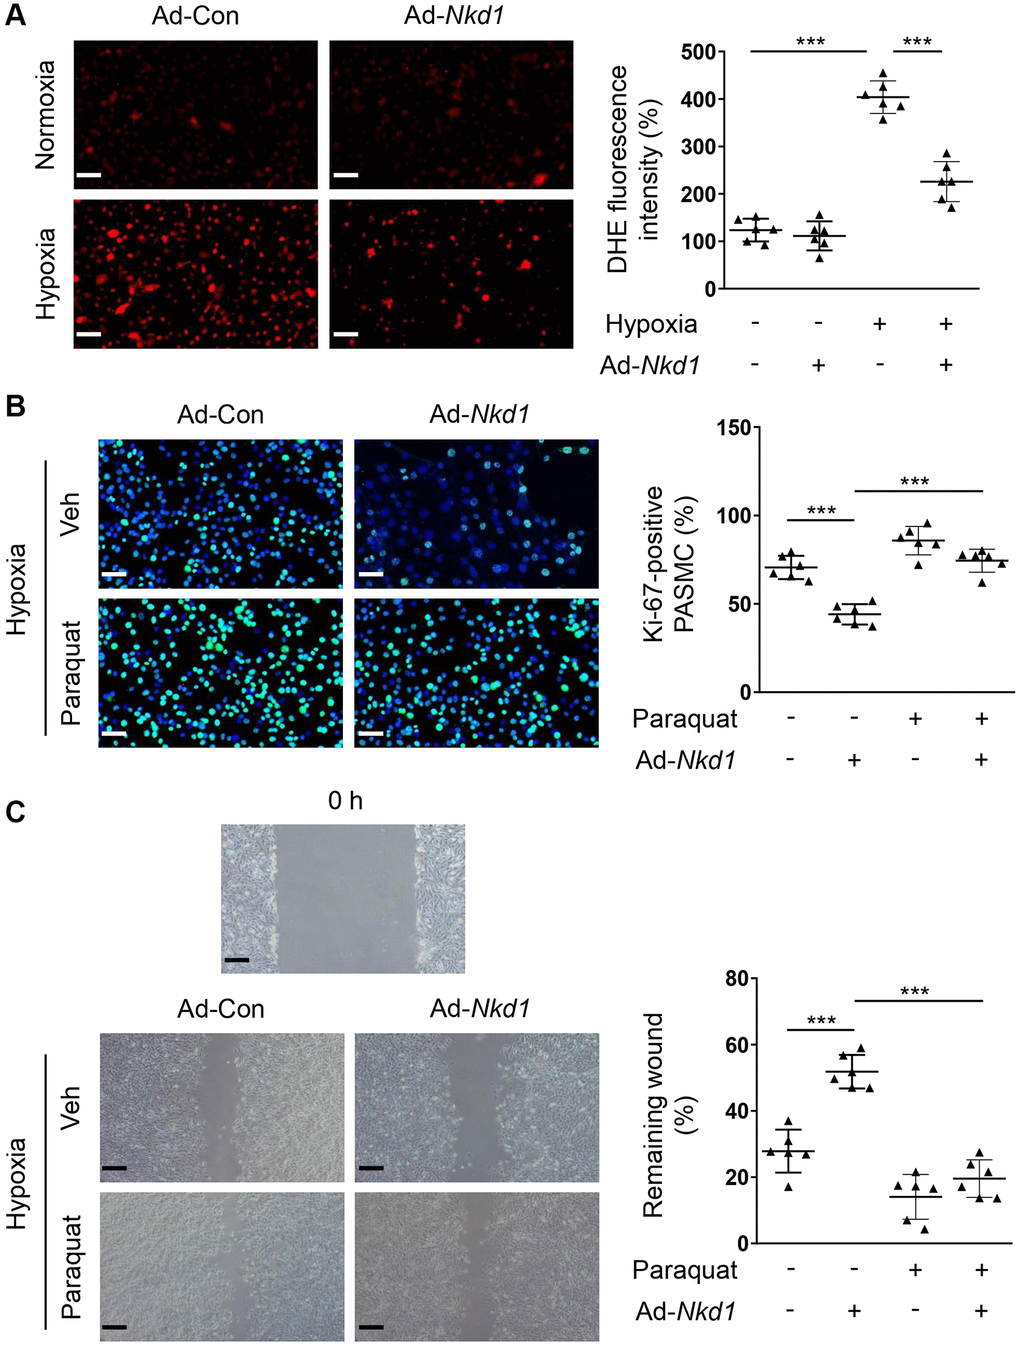 NKD1 suppresses hypoxia-induced proliferation and migration of PASMCs via inhibiting oxidative stress. (A) PASMCs were transfected with Ad-Con or Ad-Nkd1 and then cultured in the condition of normoxia or hypoxia. Above treated PASMCs were stained with DHE. Representative pictures and the corresponding quantification of DHE fluorescence intensity were shown (post hoc for LSD test; n = 6 samples). Bar = 50 μm. Hypoxia-challenged PASMCs were transfected with Ad-Con or Ad-Nkd1 and then cultured with or without paraquat treatment. (B) Above treated PASMCs were stained with Ki-67 (green) and DAPI (blue). Representative pictures and the corresponding percentage of Ki-67-positive PASMCs were shown (post hoc for LSD test; n = 6 samples). Bar = 50 μm. (C) Migration of above-treated PASMCs was assessed by wound-healing assay (post hoc for LSD test; n = 6 samples). Bar = 200 μm. Data were shown as mean ± S.D. ***P 